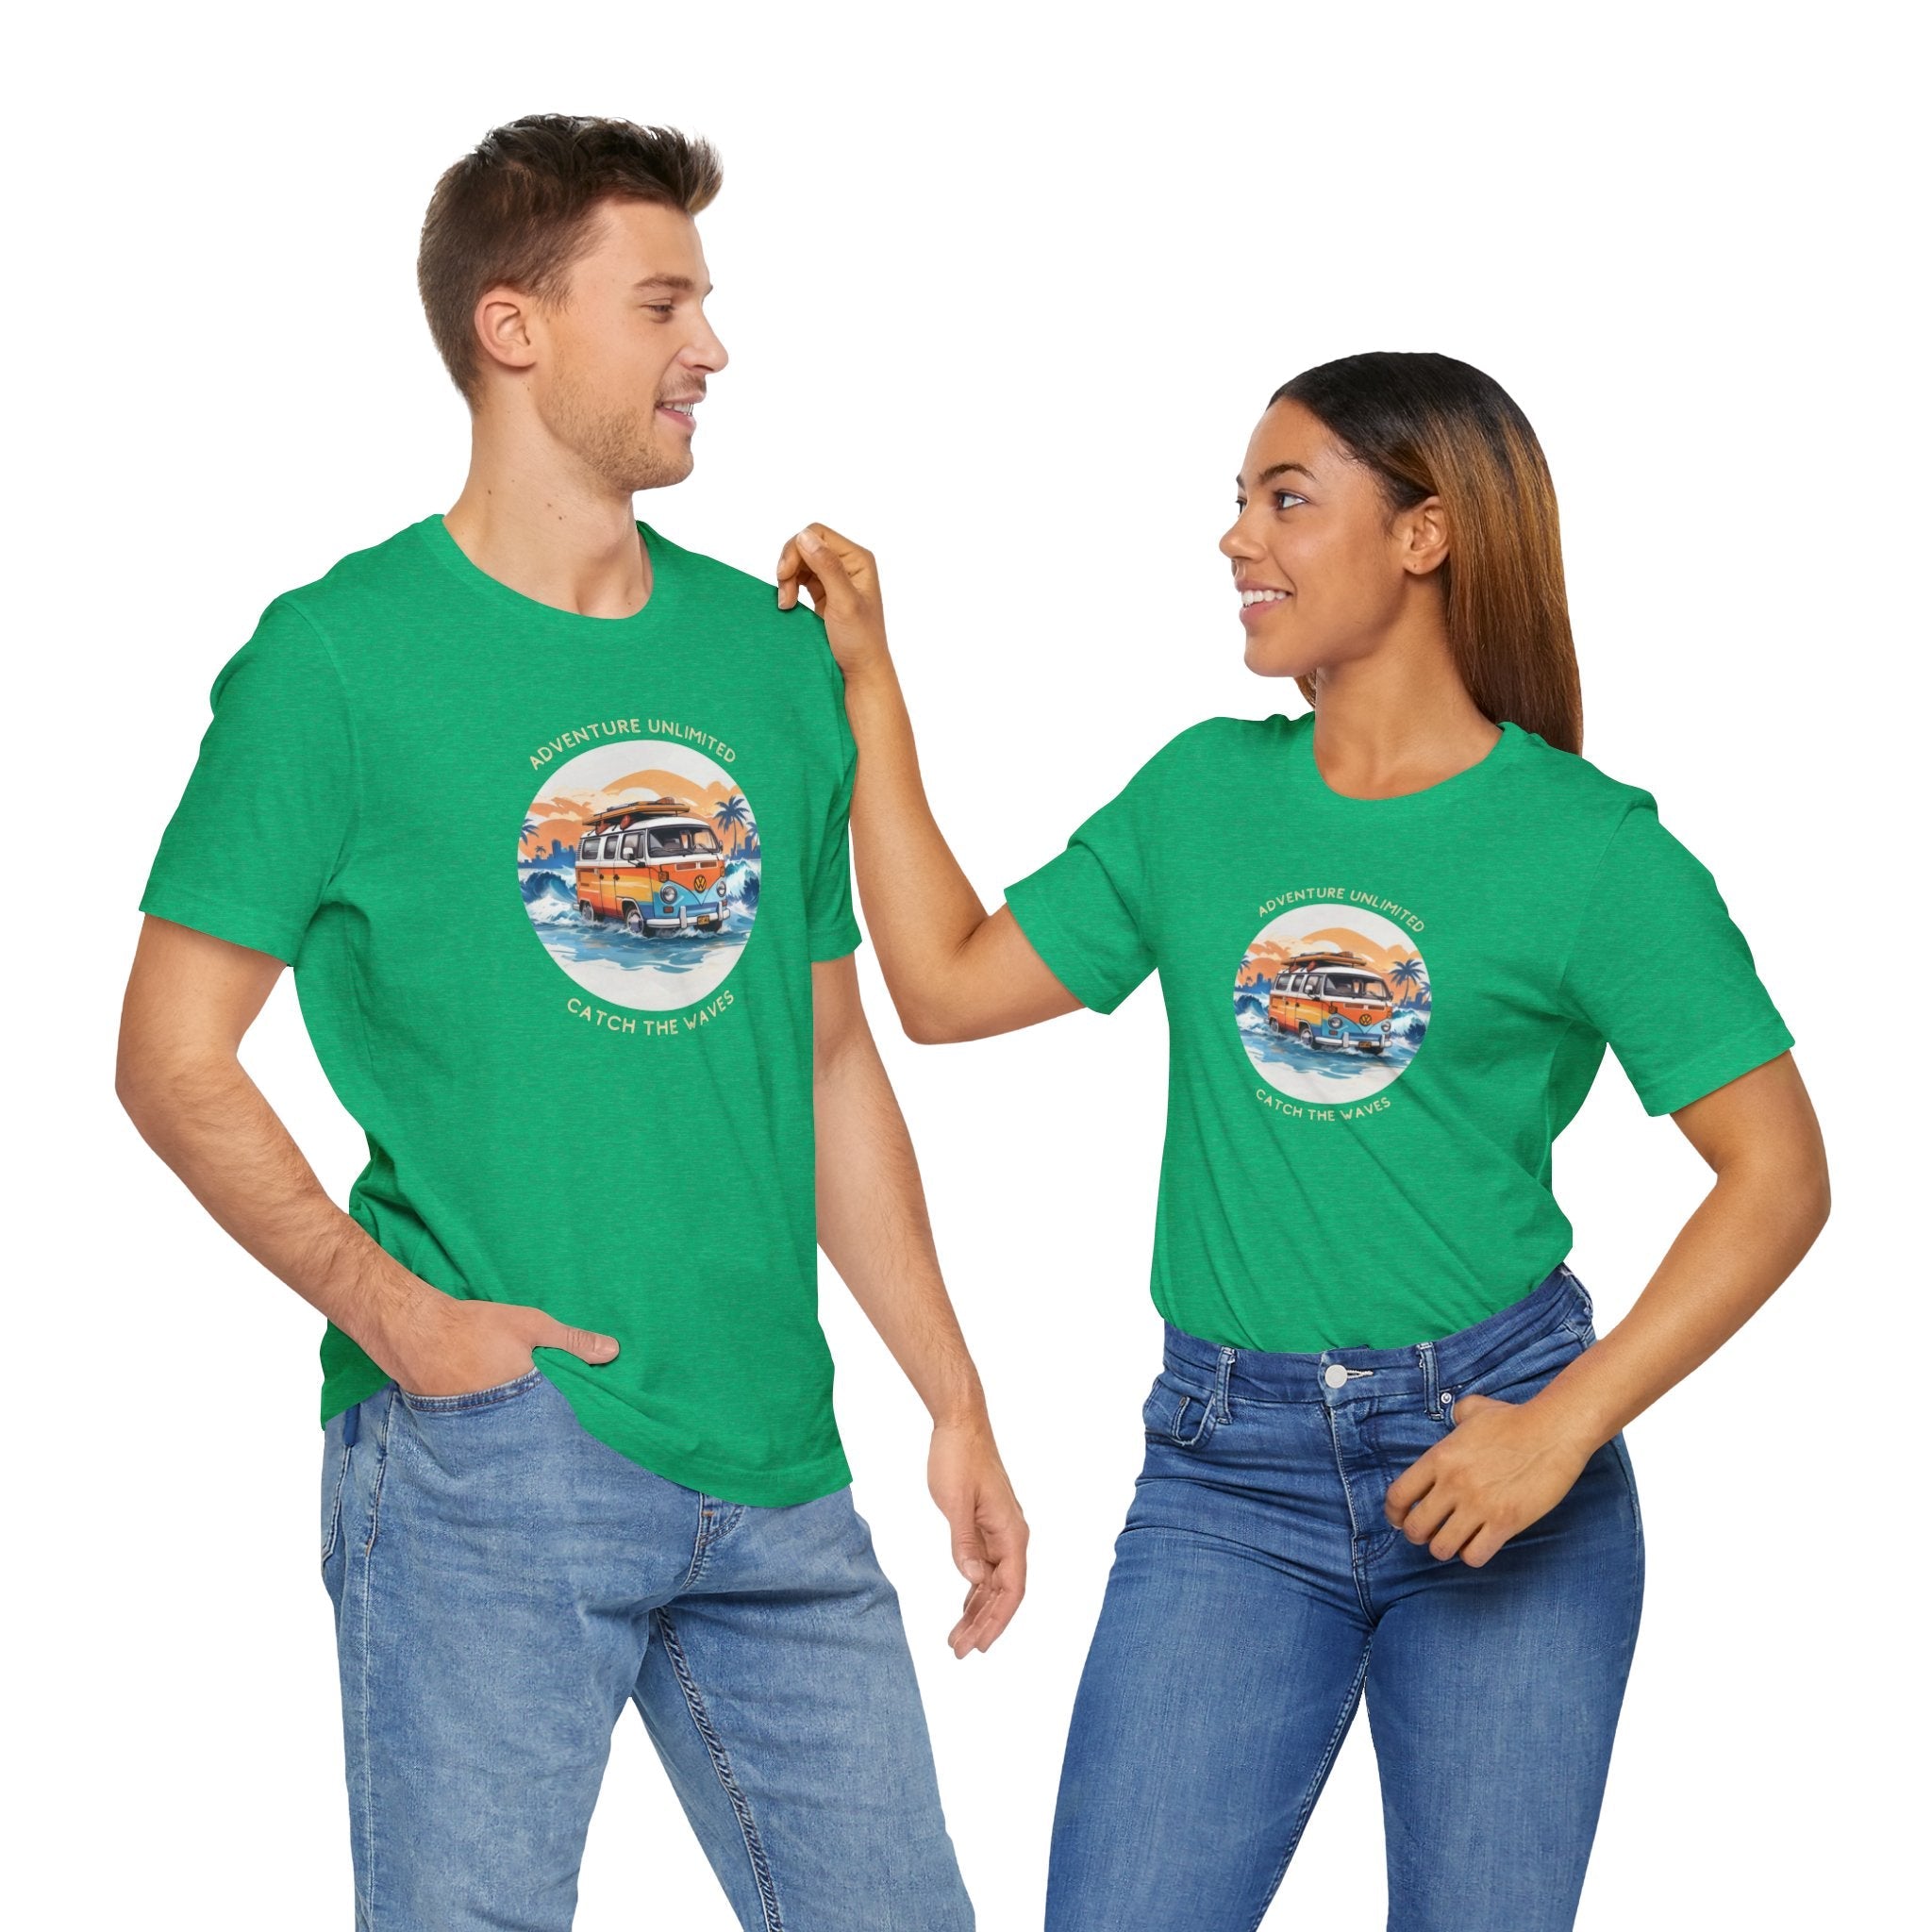 Adventure Unlimited green shirts with ’I love you’ design on a printed unisex jersey tee